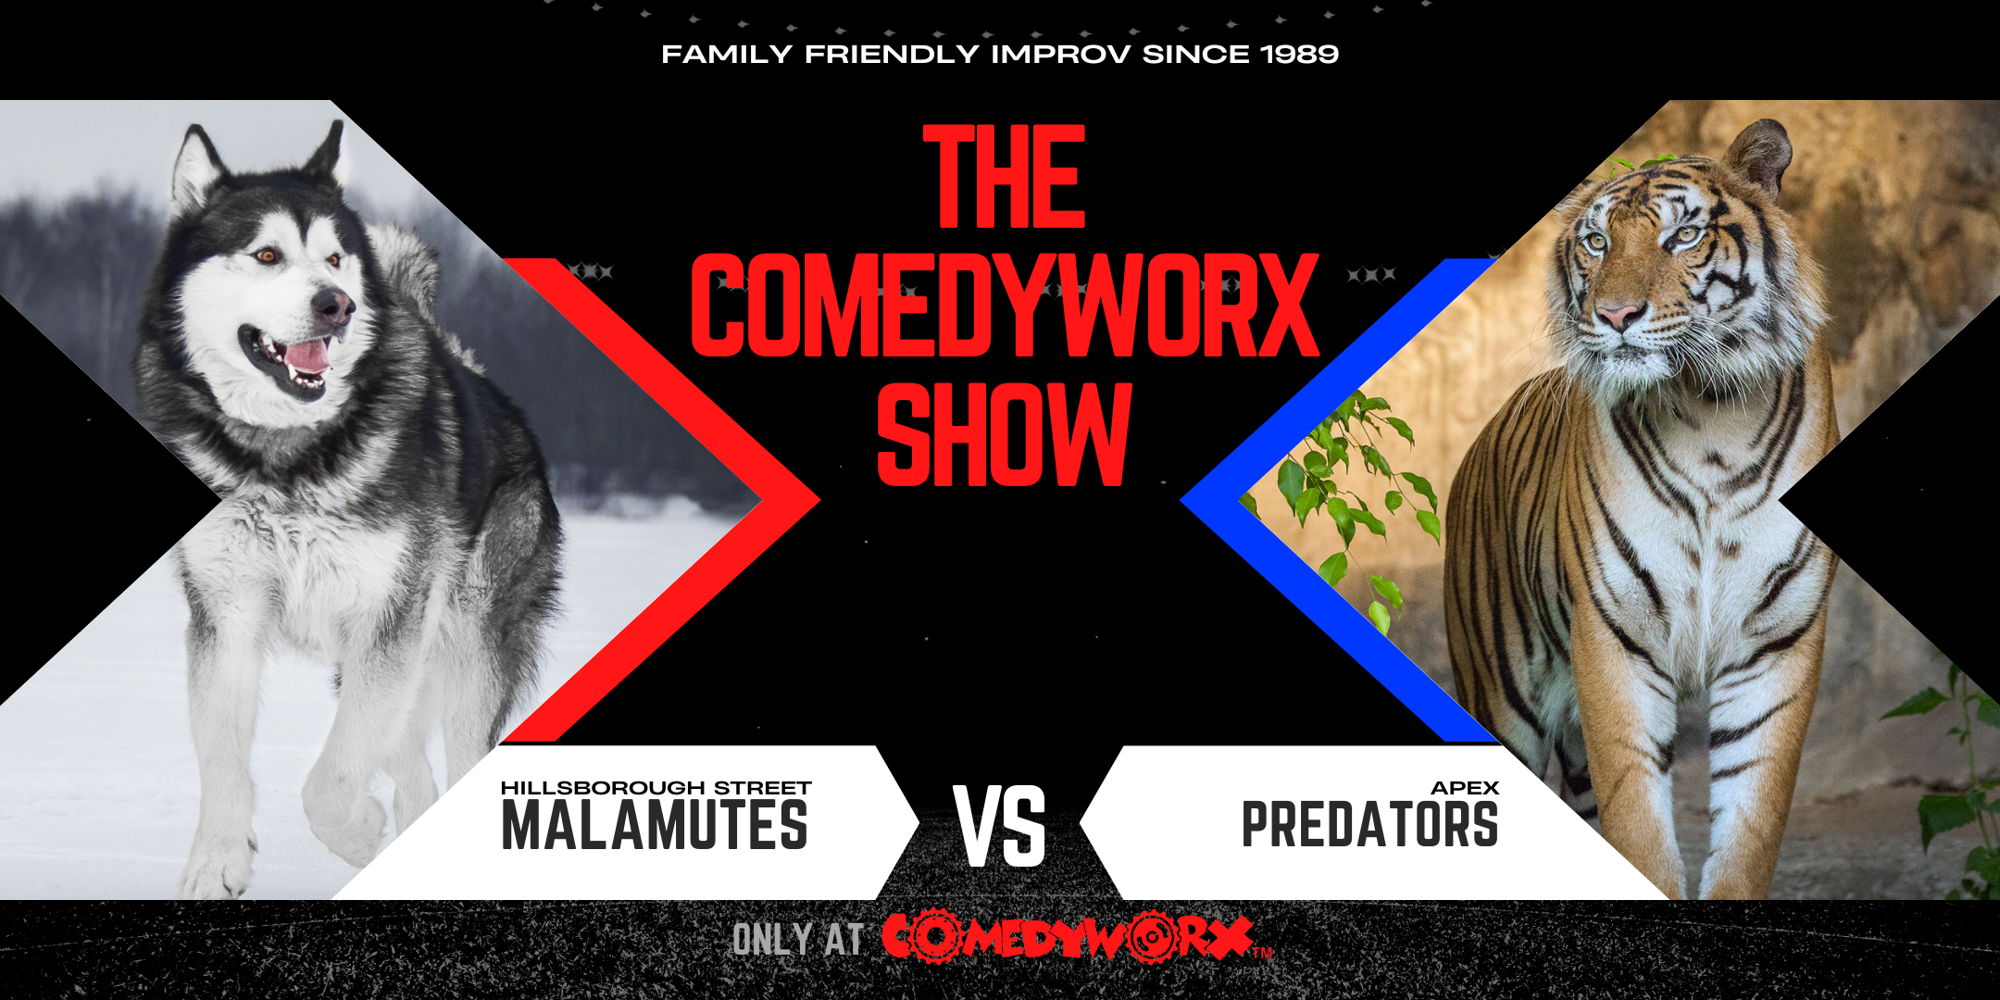 The ComedyWorx Show promotional image